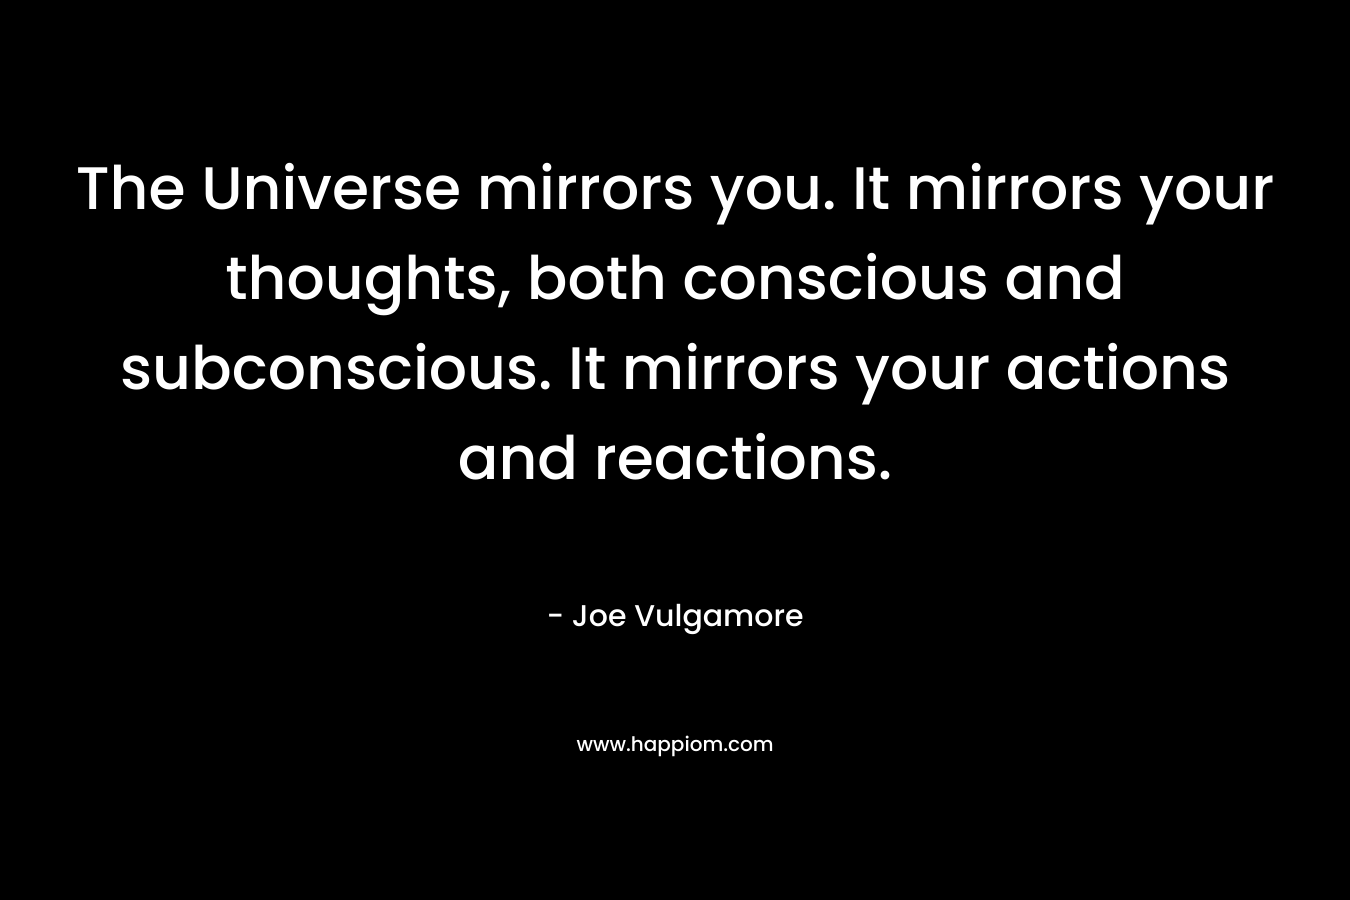 The Universe mirrors you. It mirrors your thoughts, both conscious and subconscious. It mirrors your actions and reactions. – Joe Vulgamore